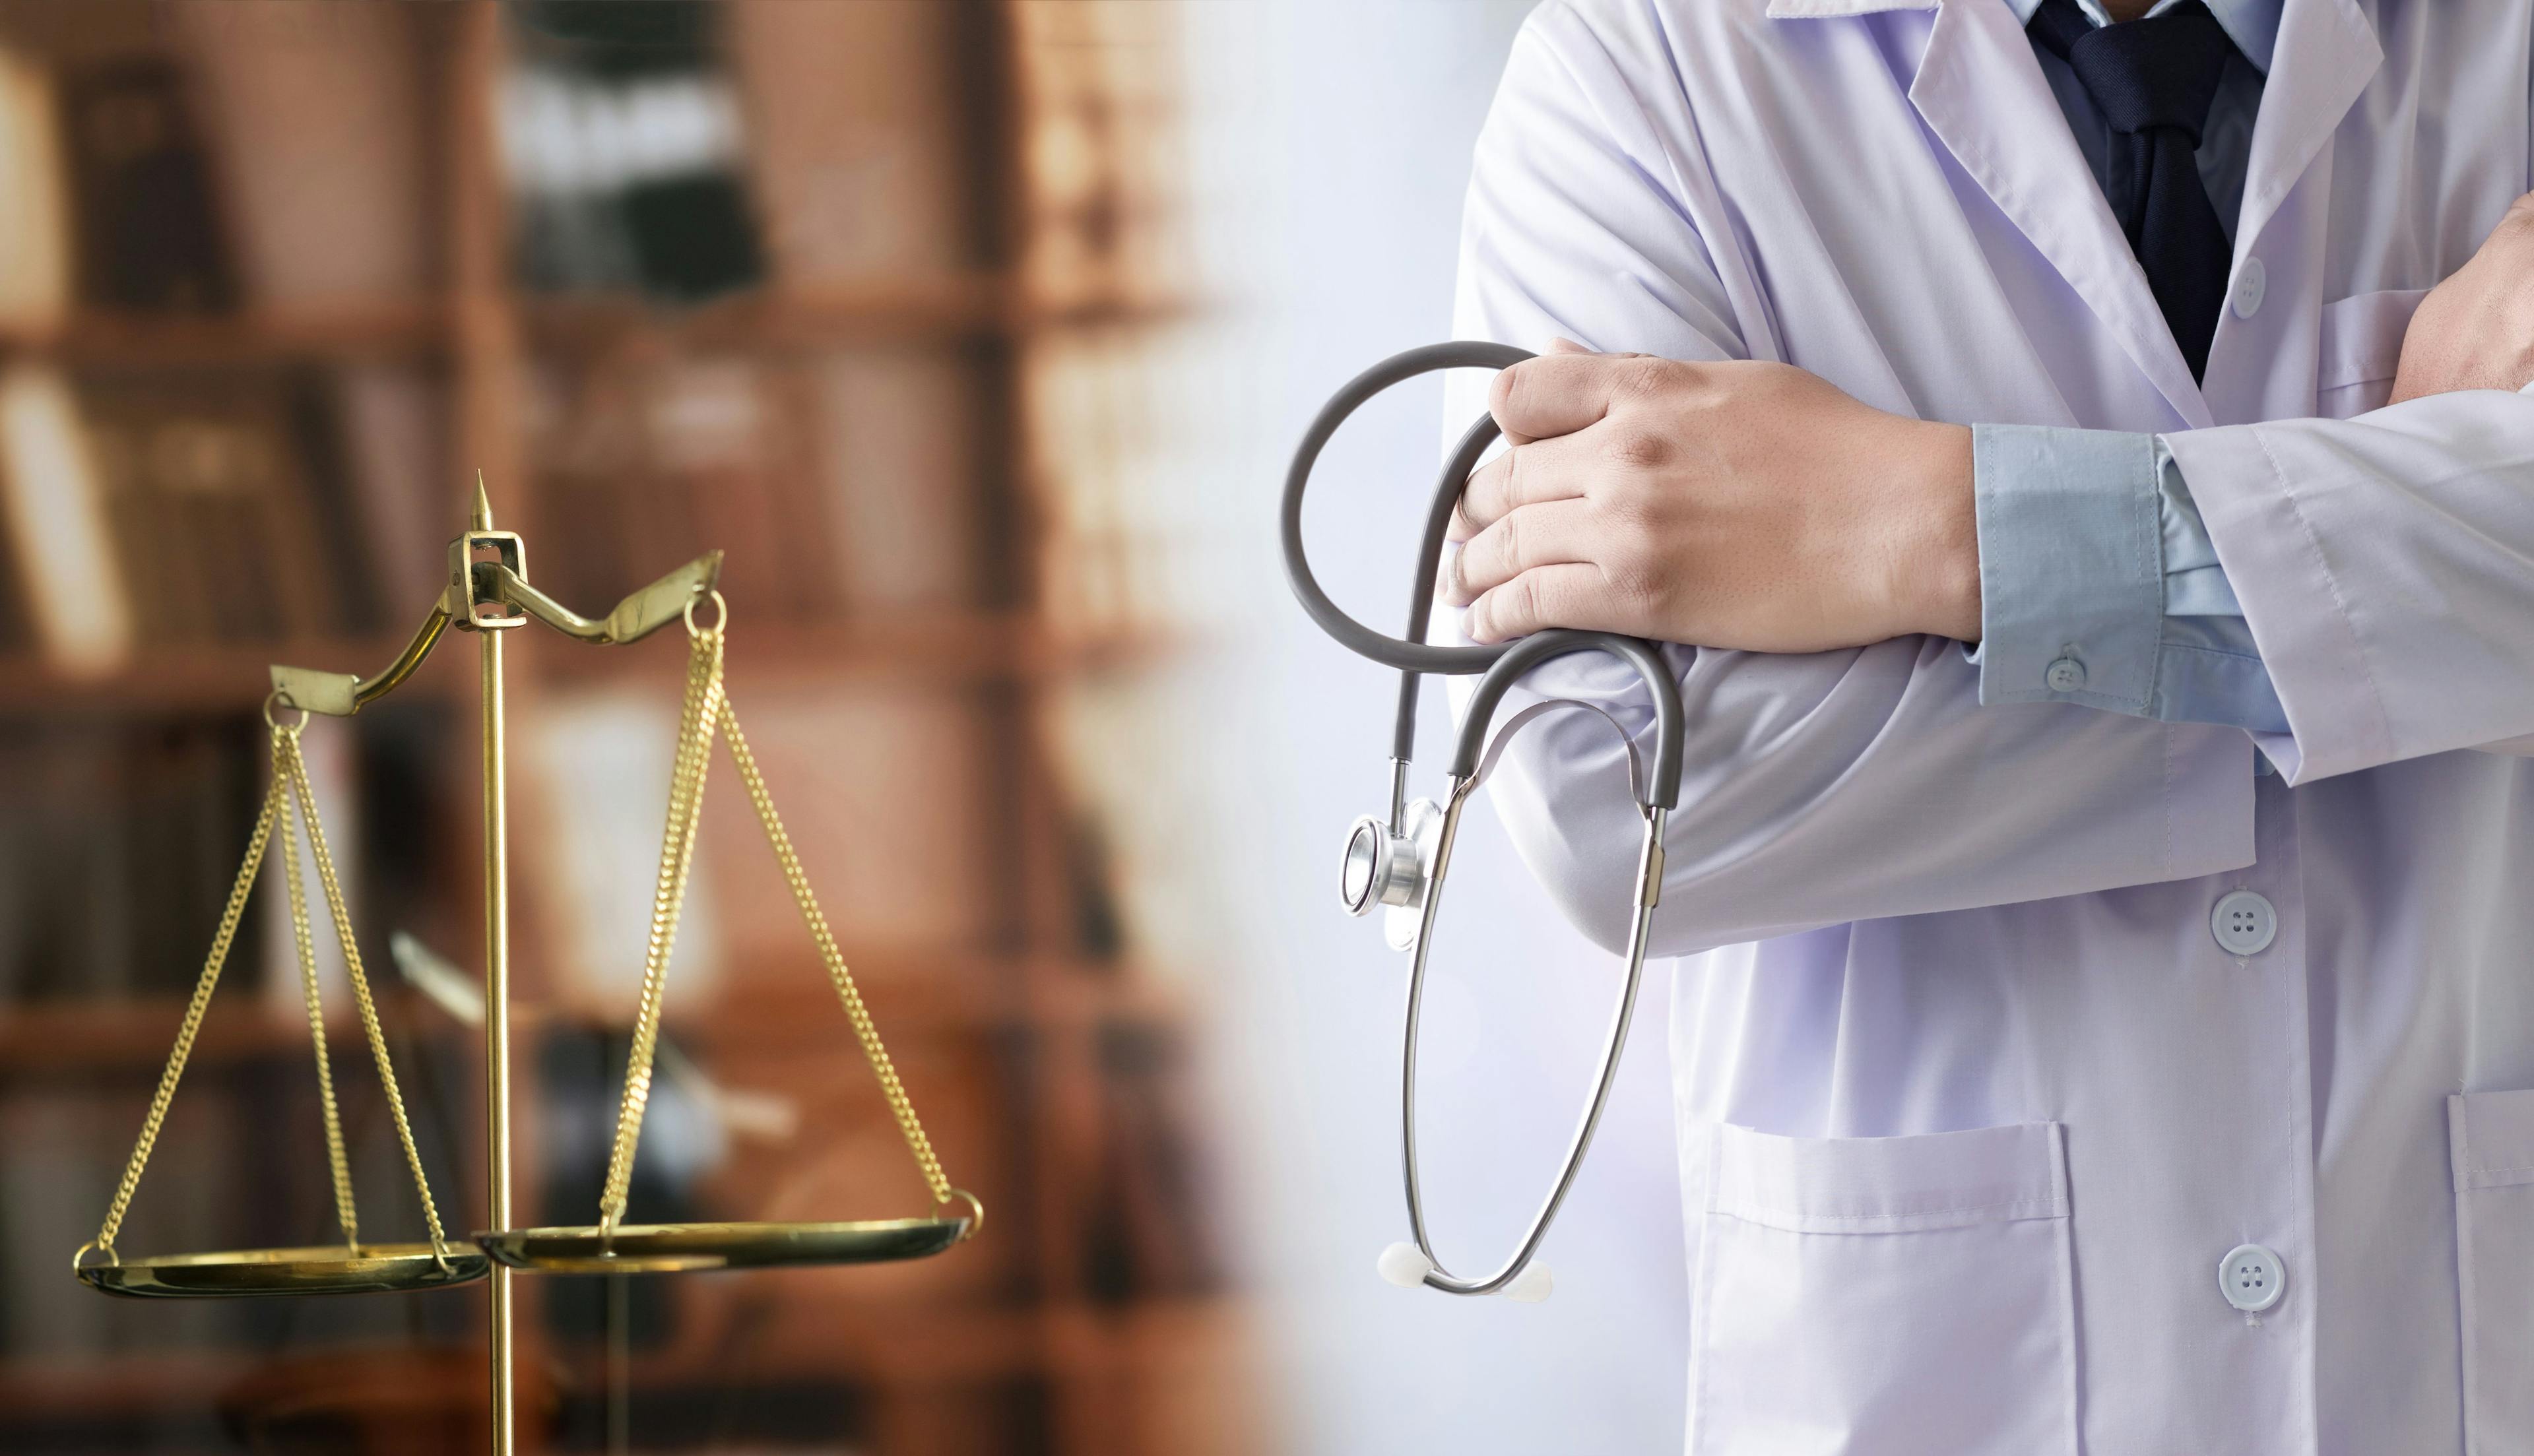 Doctor and scale of justice | Image credit: onephoto - stock.adobe.com